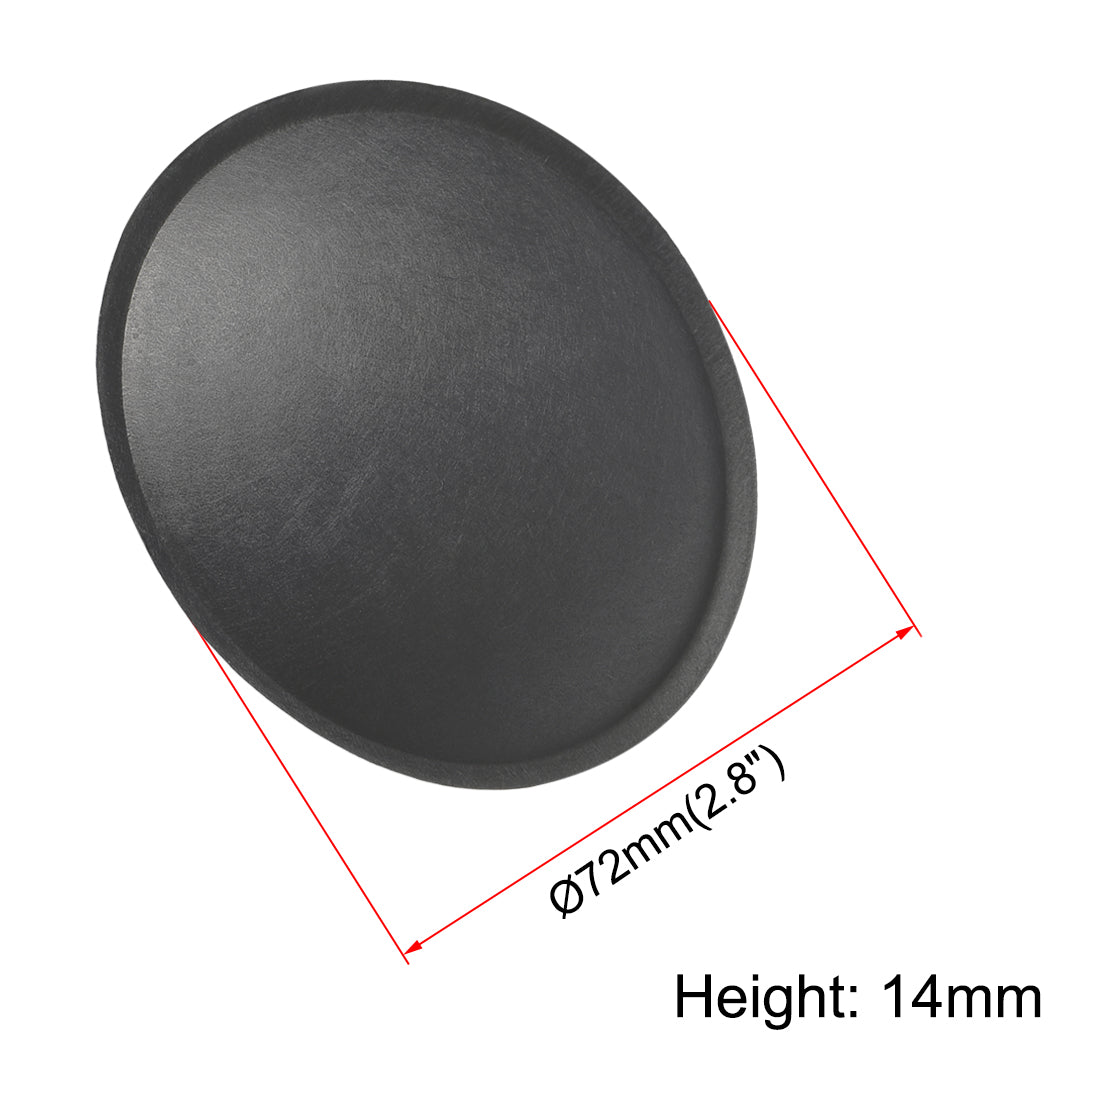 uxcell Uxcell Speaker Dust Cap 72mm/2.8" Diameter Subwoofer Paper Dome Coil Cover Caps